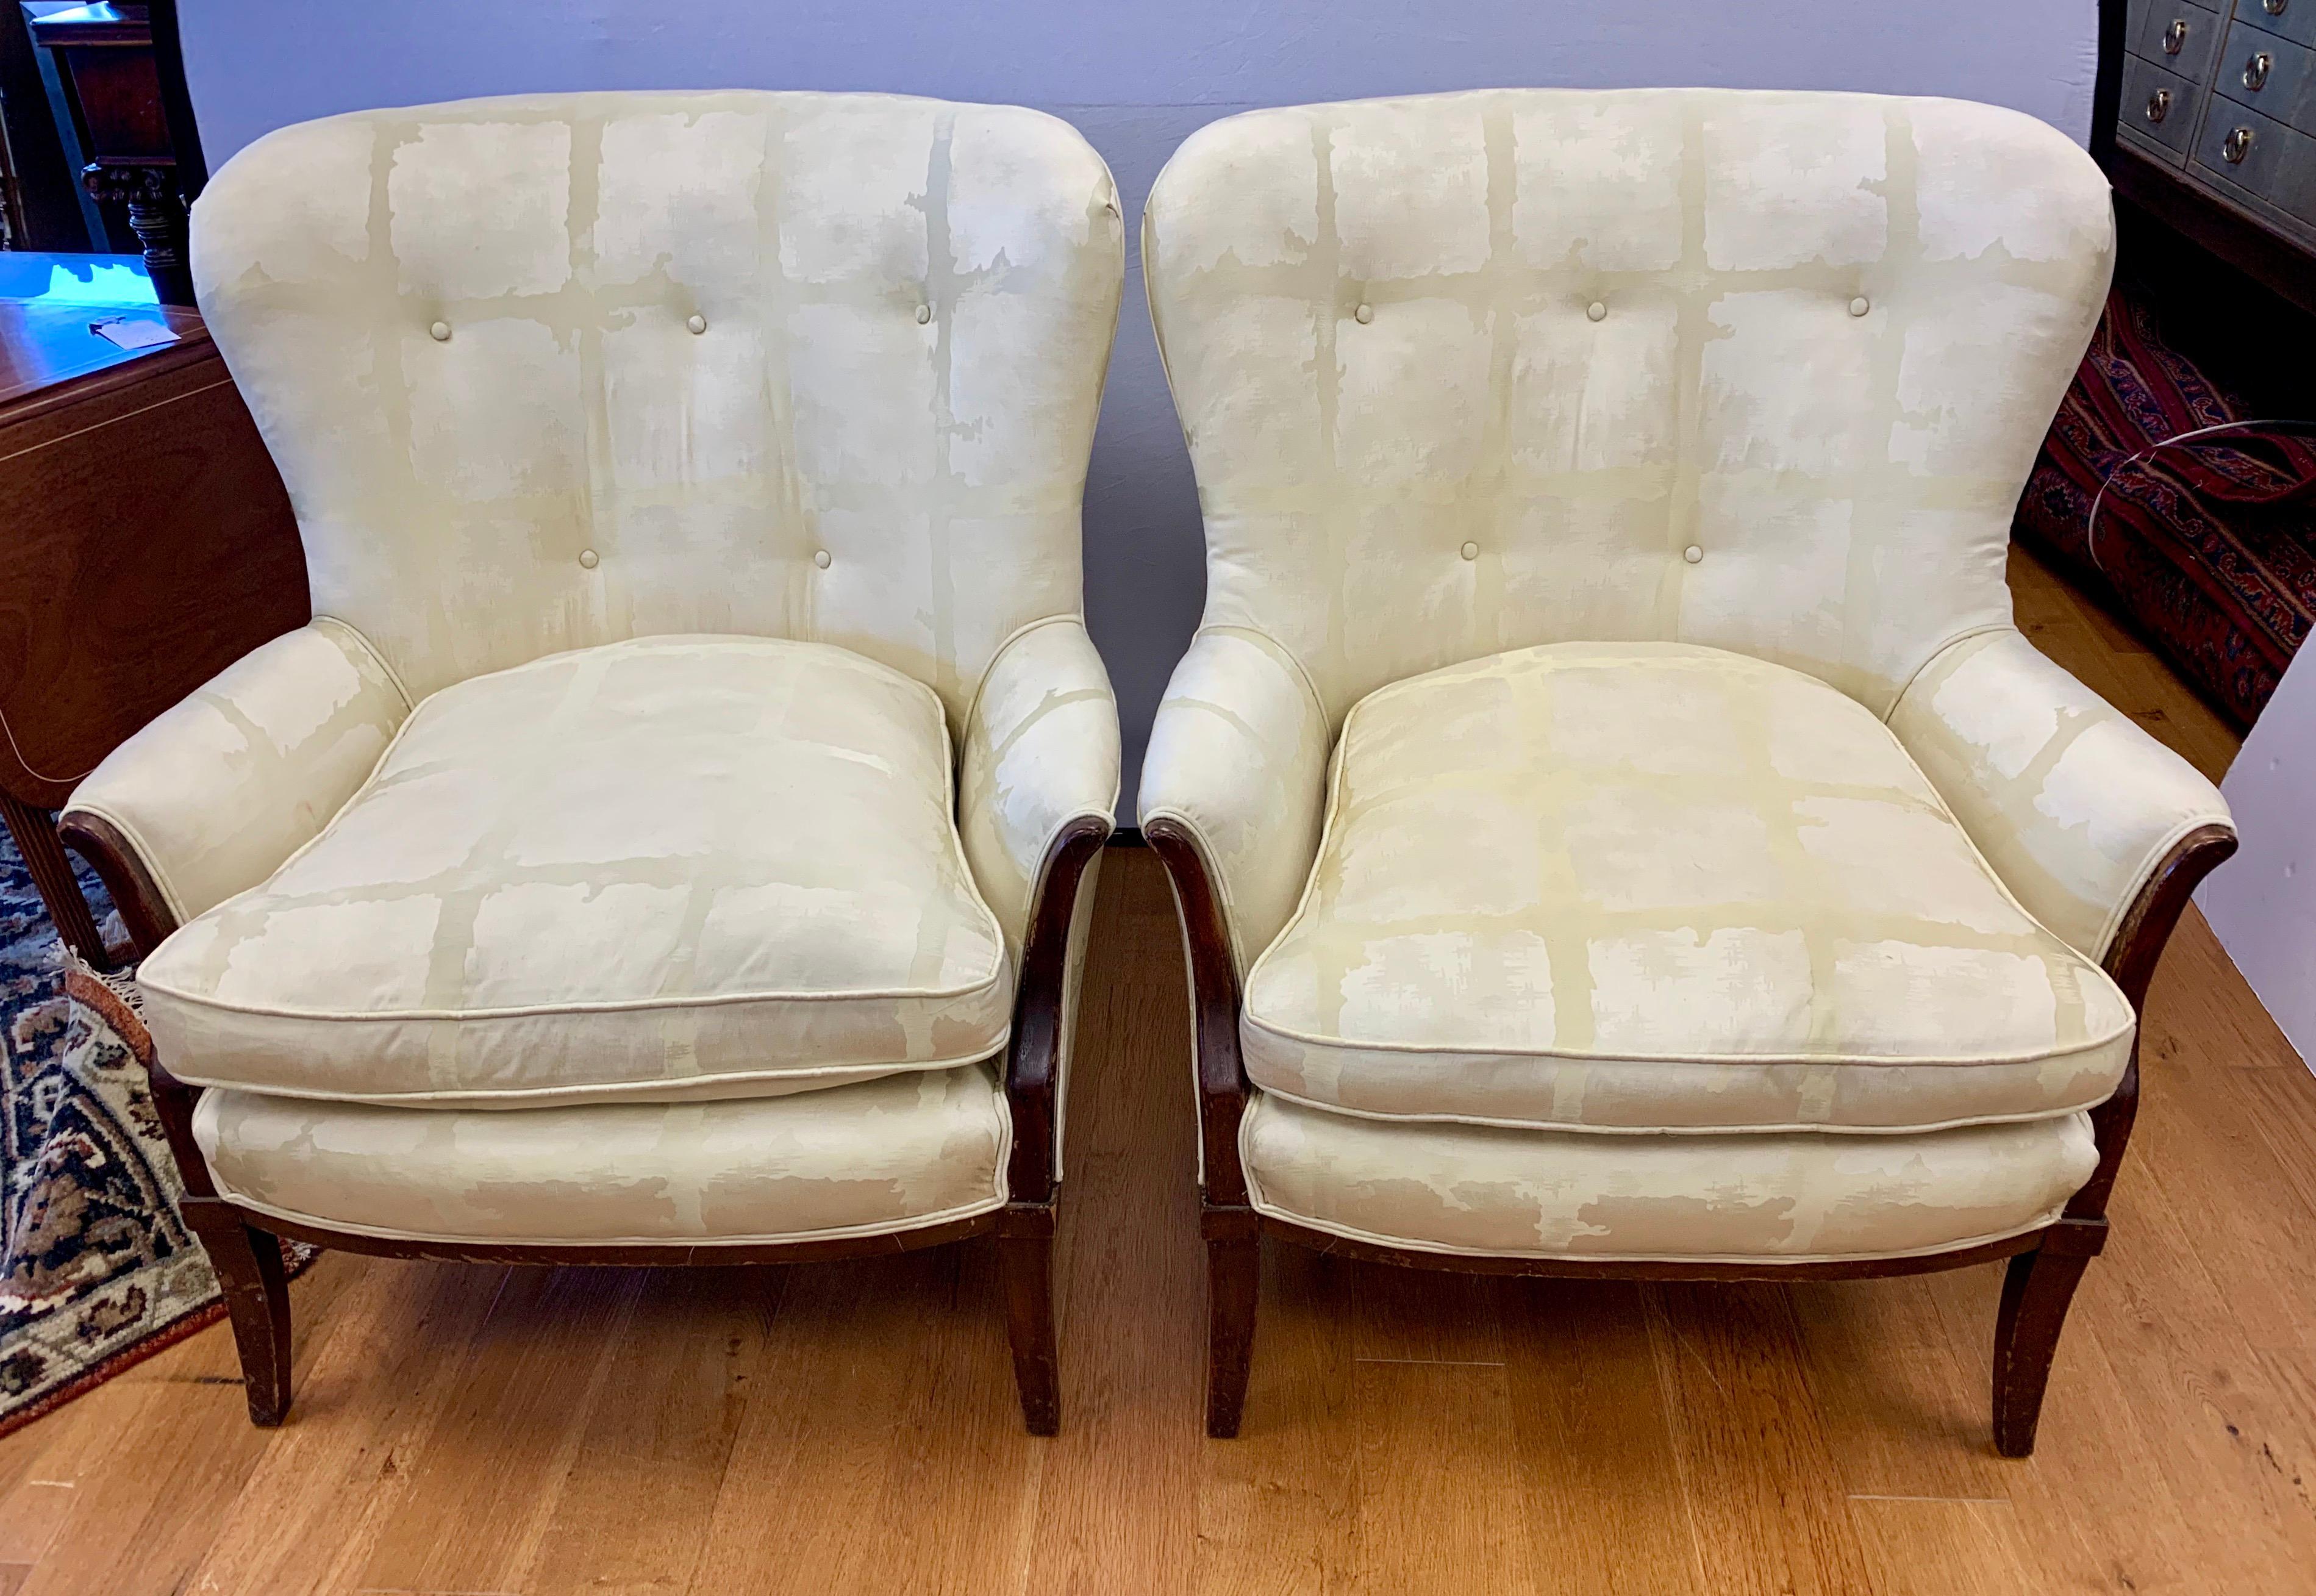 Elegant pair of vintage wingback chairs with Scalamandre fabric which needs a cleaning by the new owner. Fabulous lines and scale, not too big, not too small. Scalamandre fabric is silk.